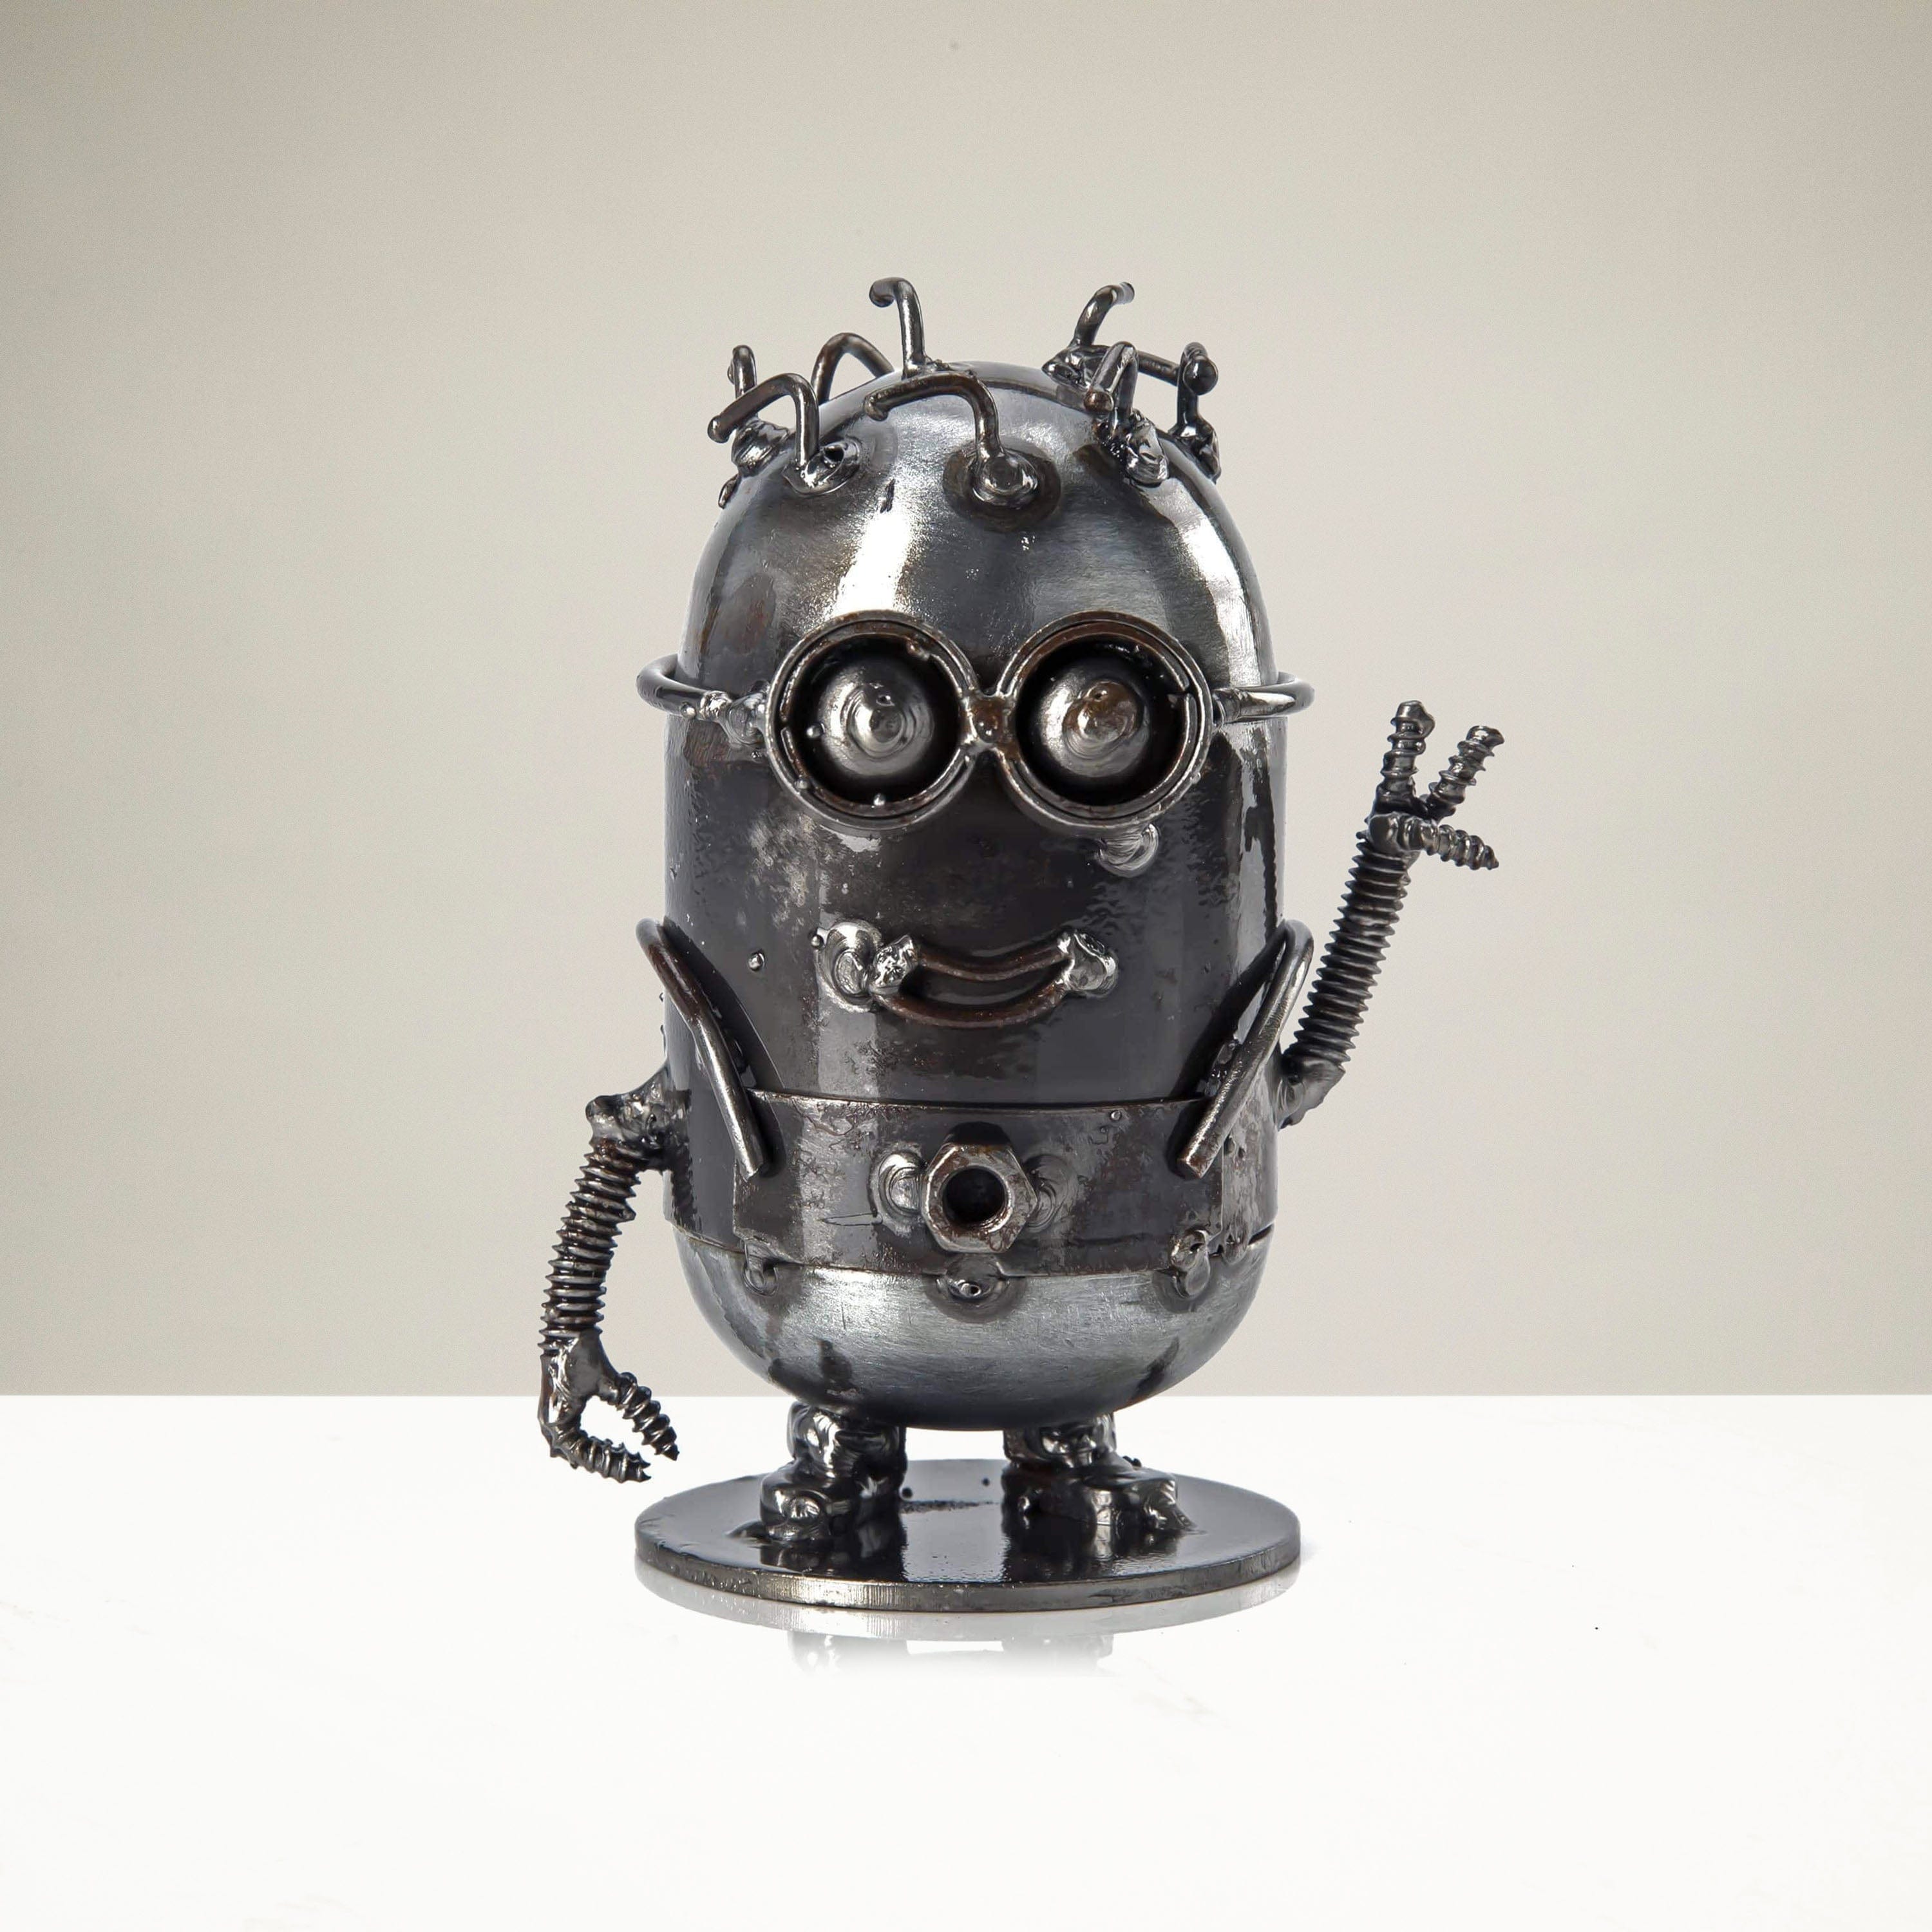 Kalifano Recycled Metal Art Minion Victory Inspired Recycled Metal Sculpture RMS-250MV-N